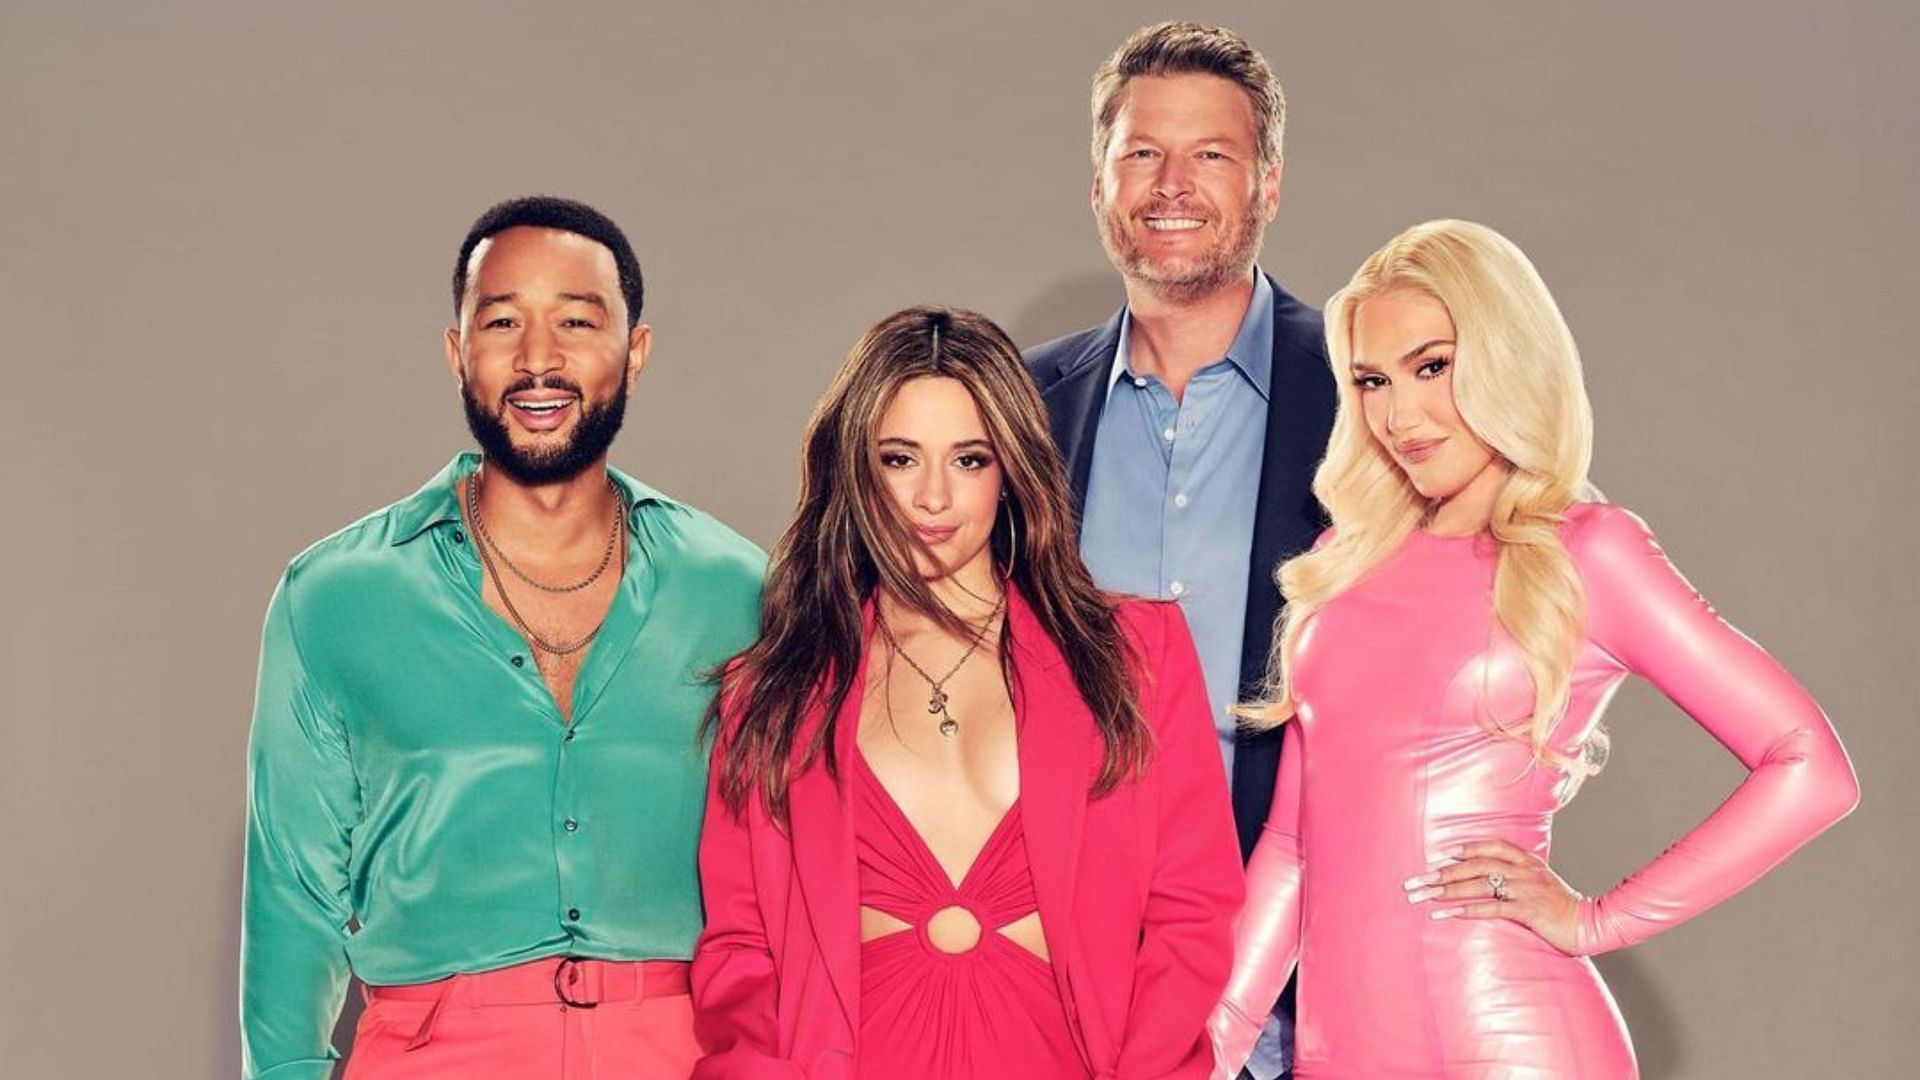 The Voice is set to return with a brand new episode